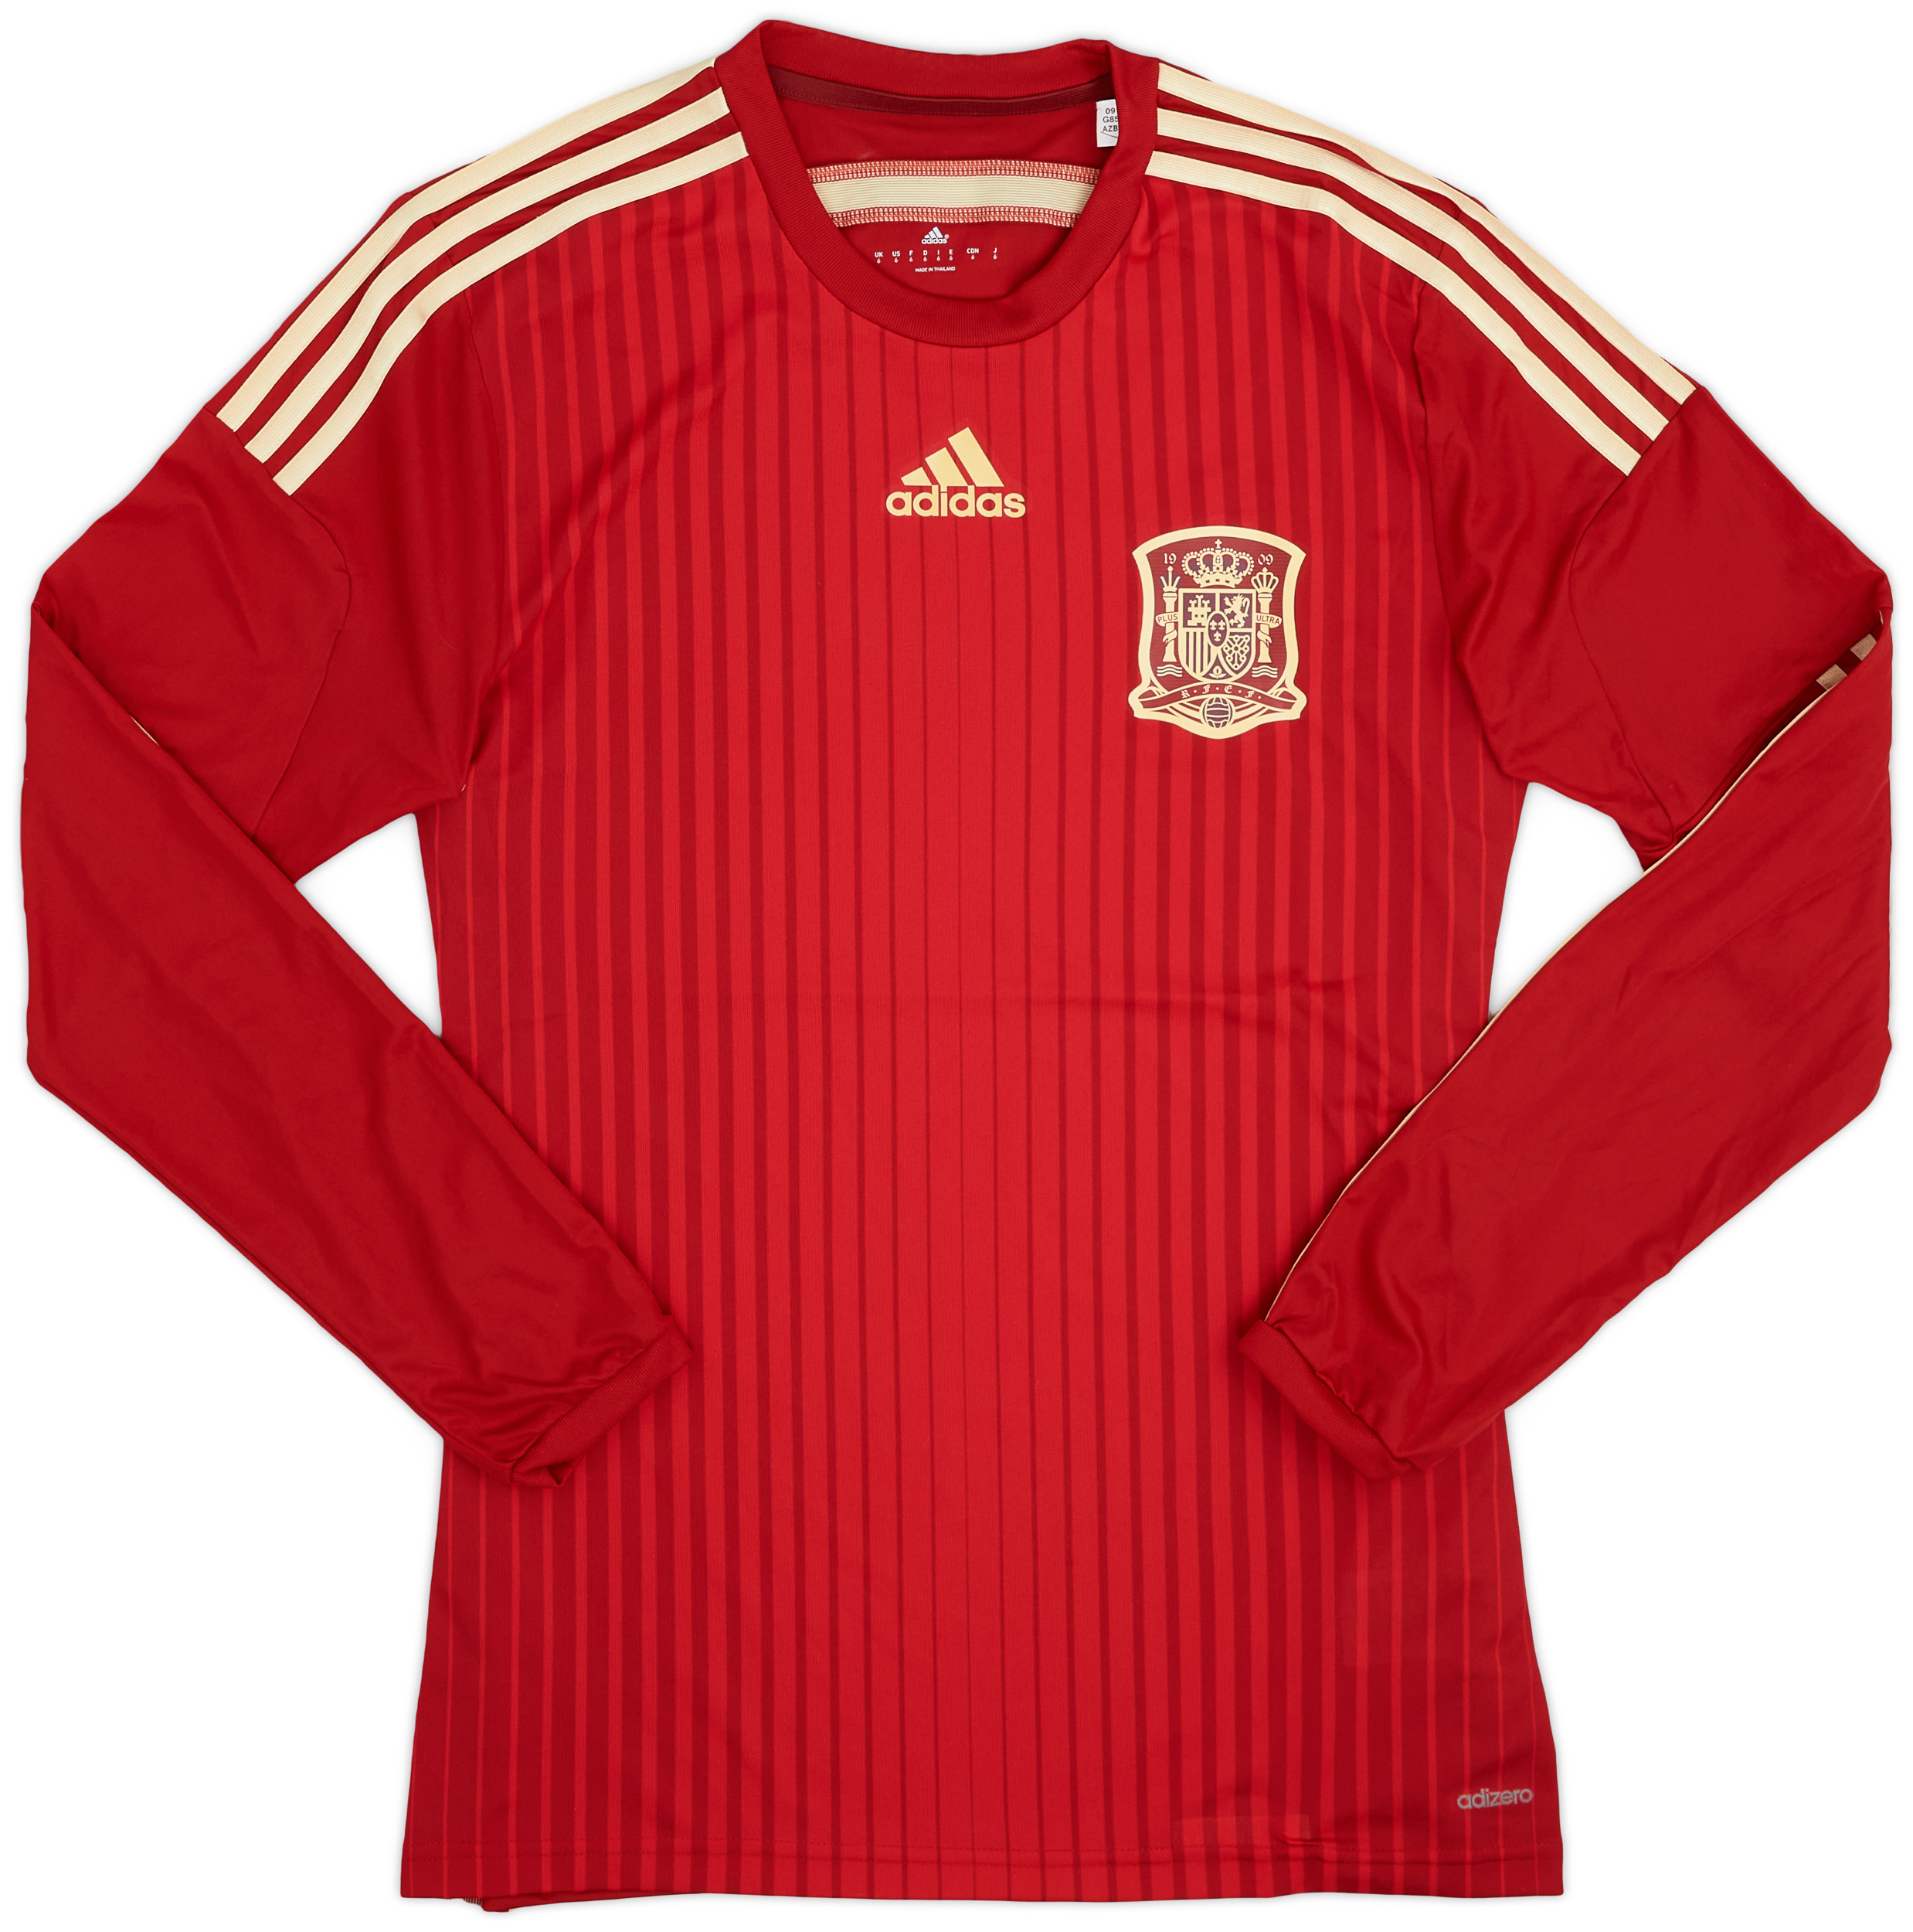 2013-15 Spain Player Issue Home Shirt - 9/10 - ()